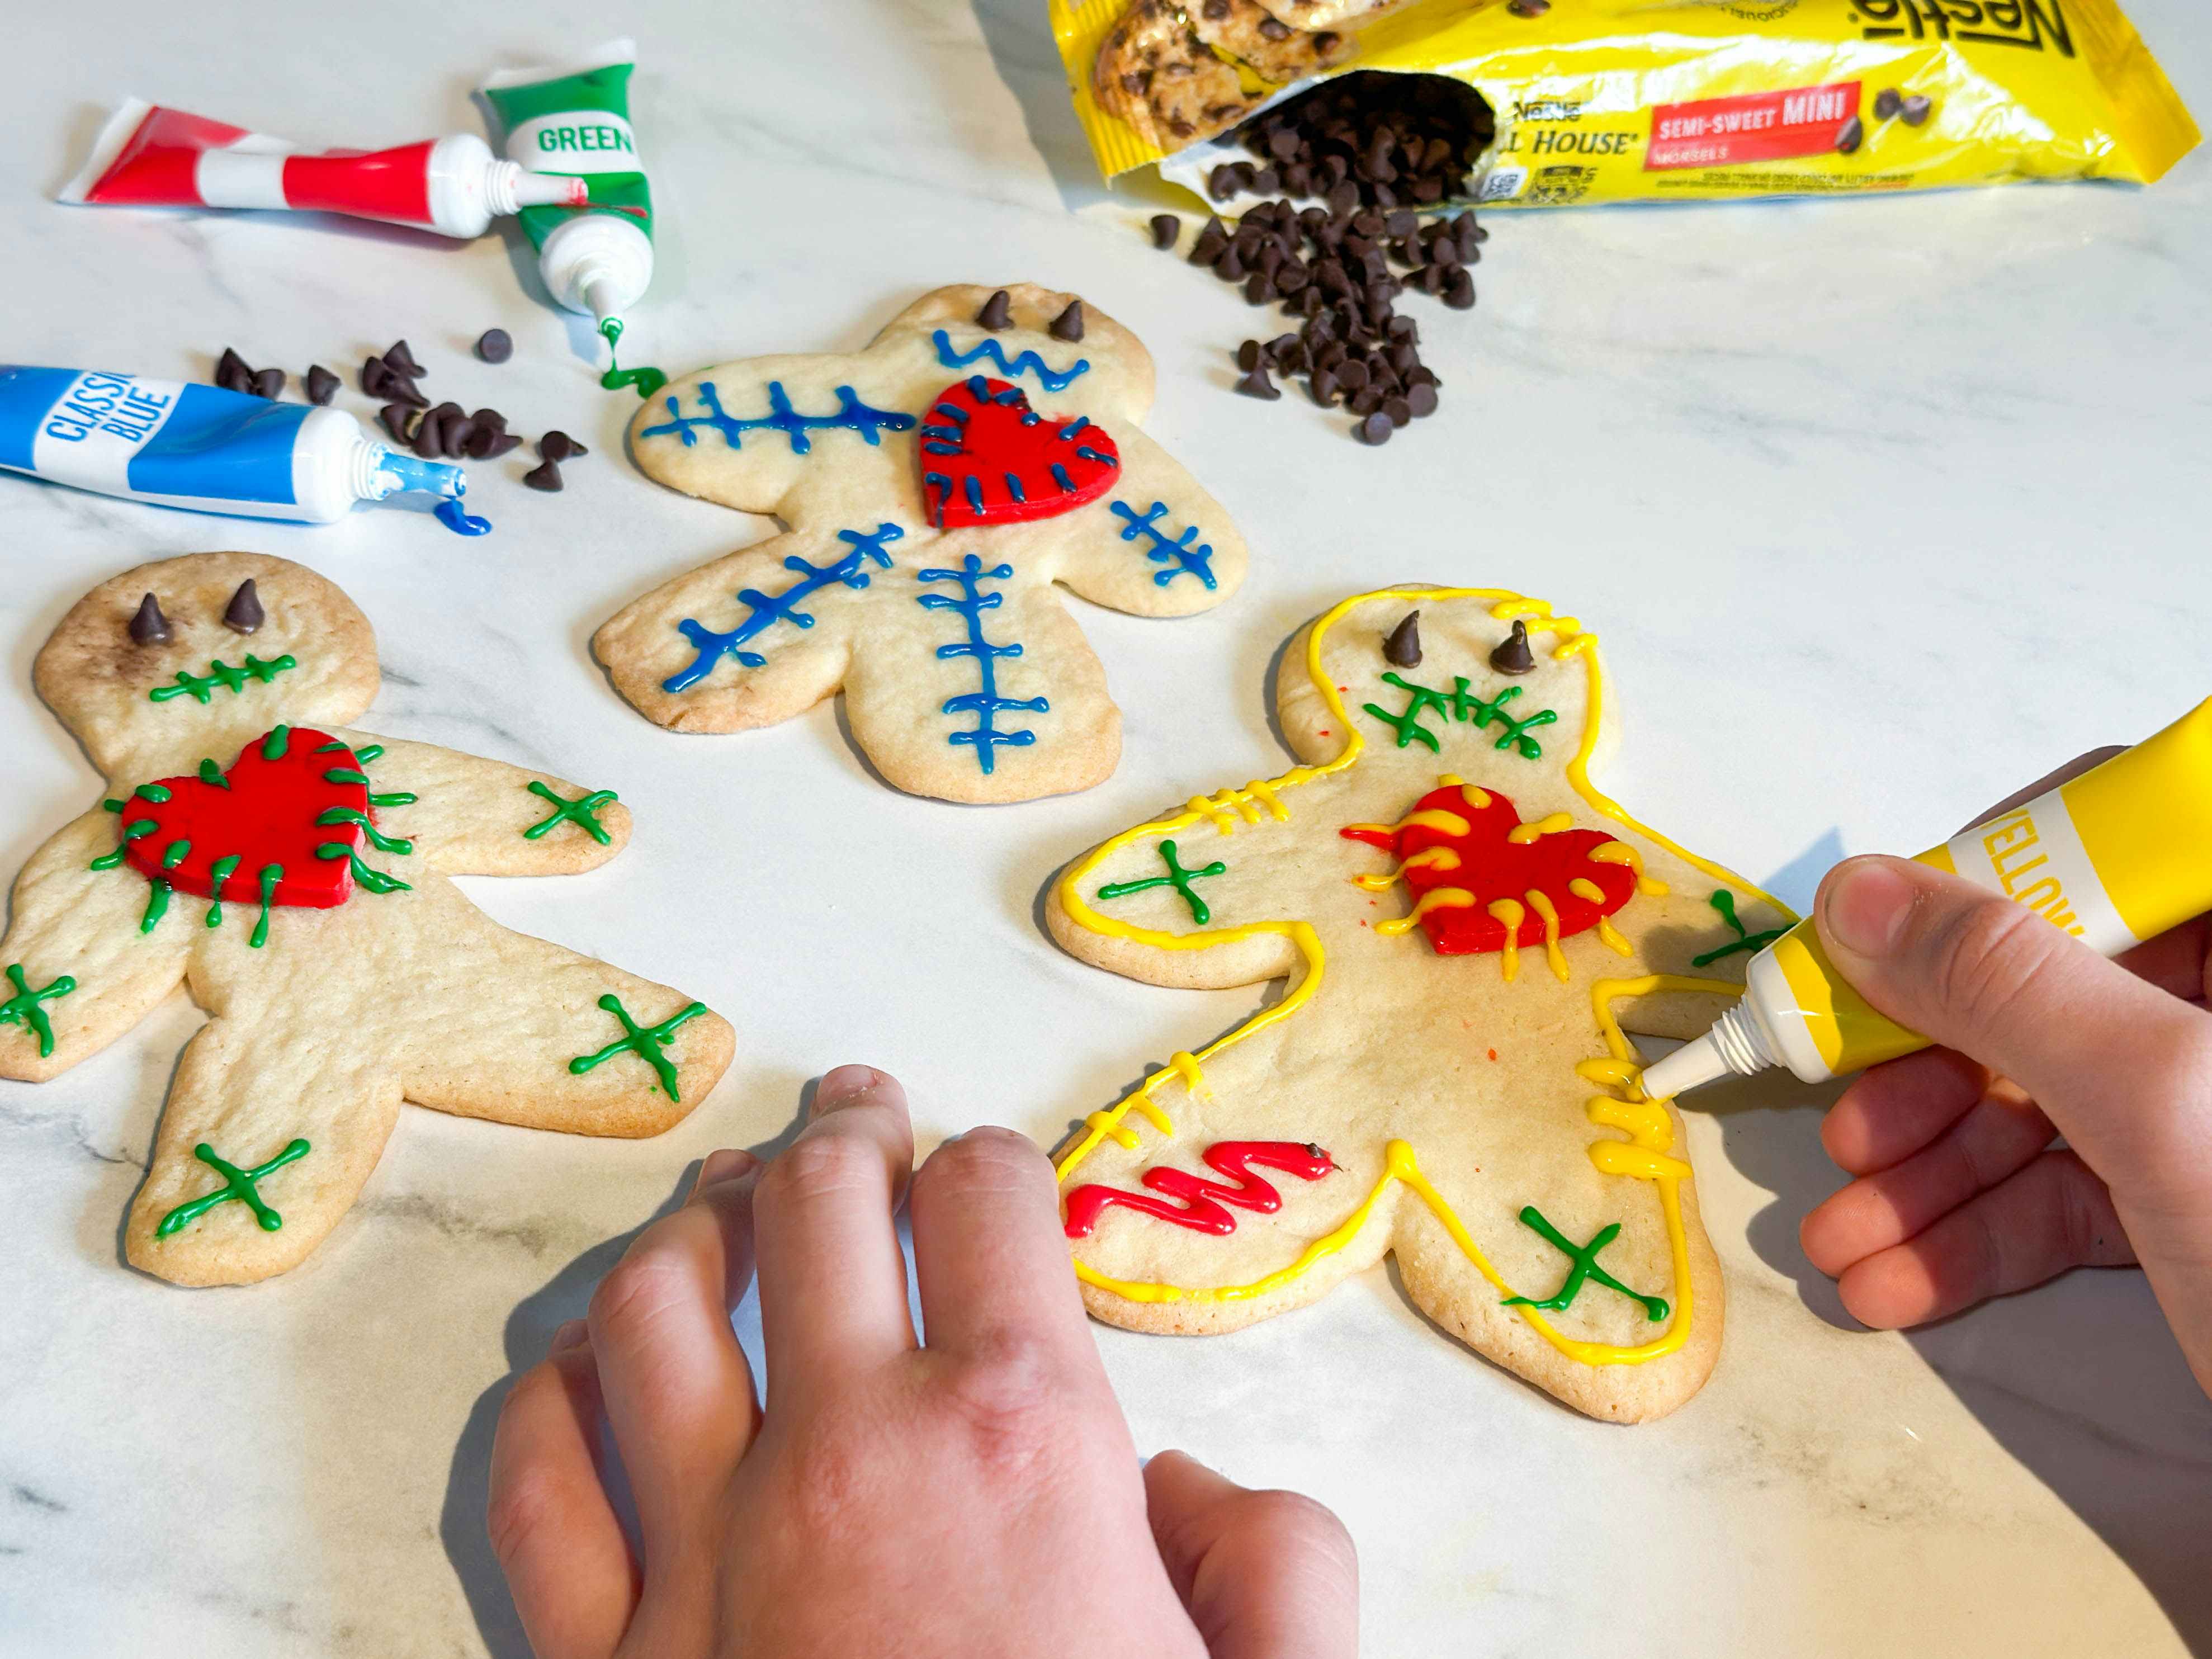 voodoo doll cookies being decorated on a countertop